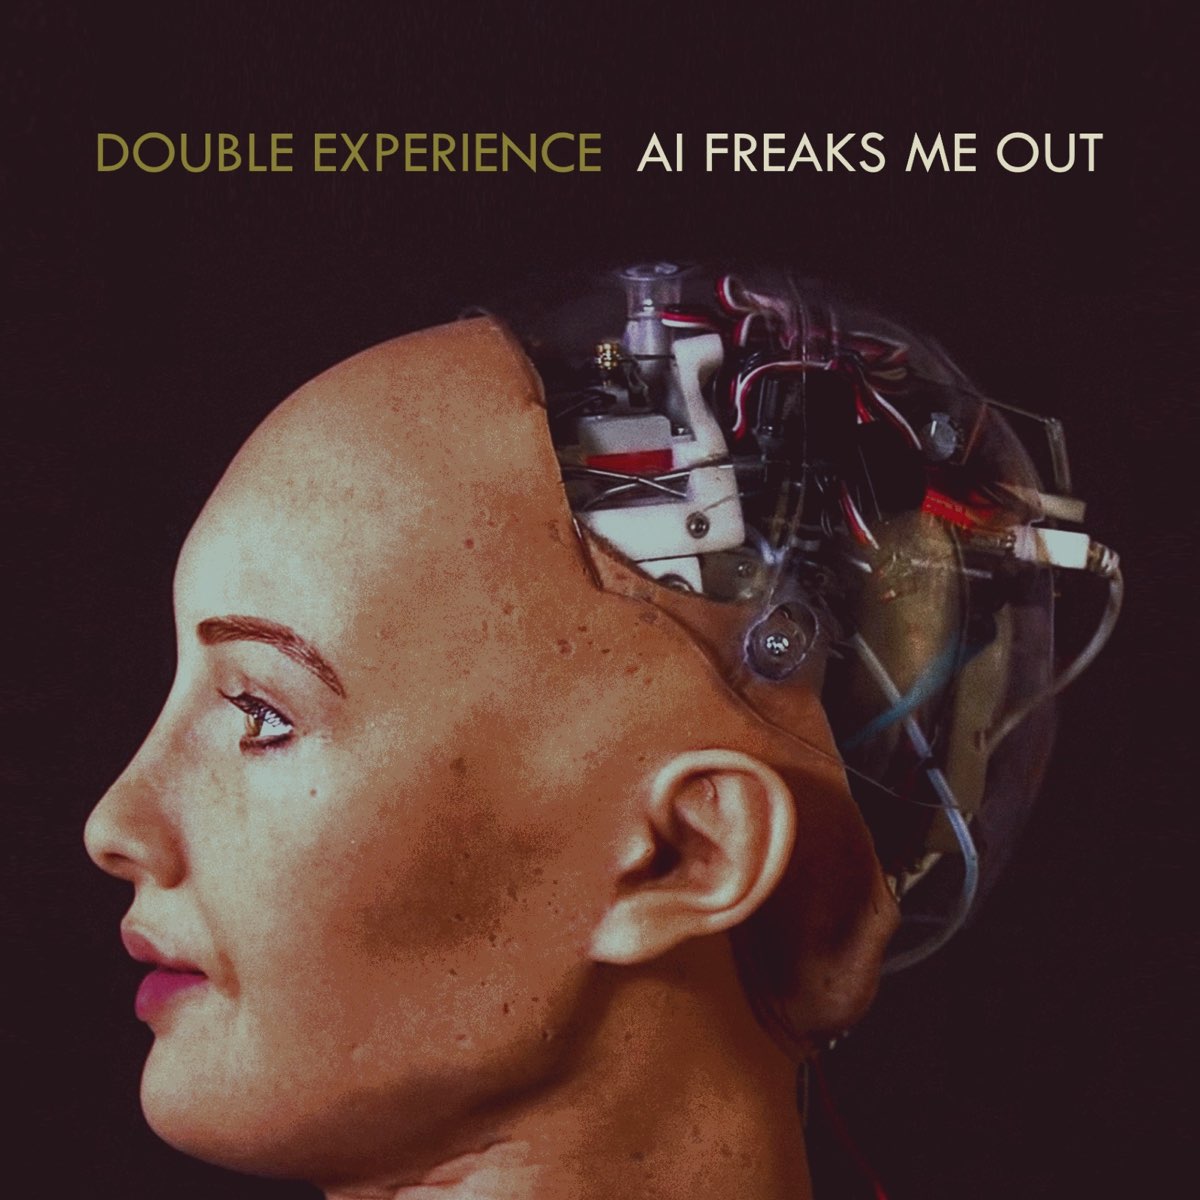 Experience presents. Выставка Double experience. Ai Freaks me out.